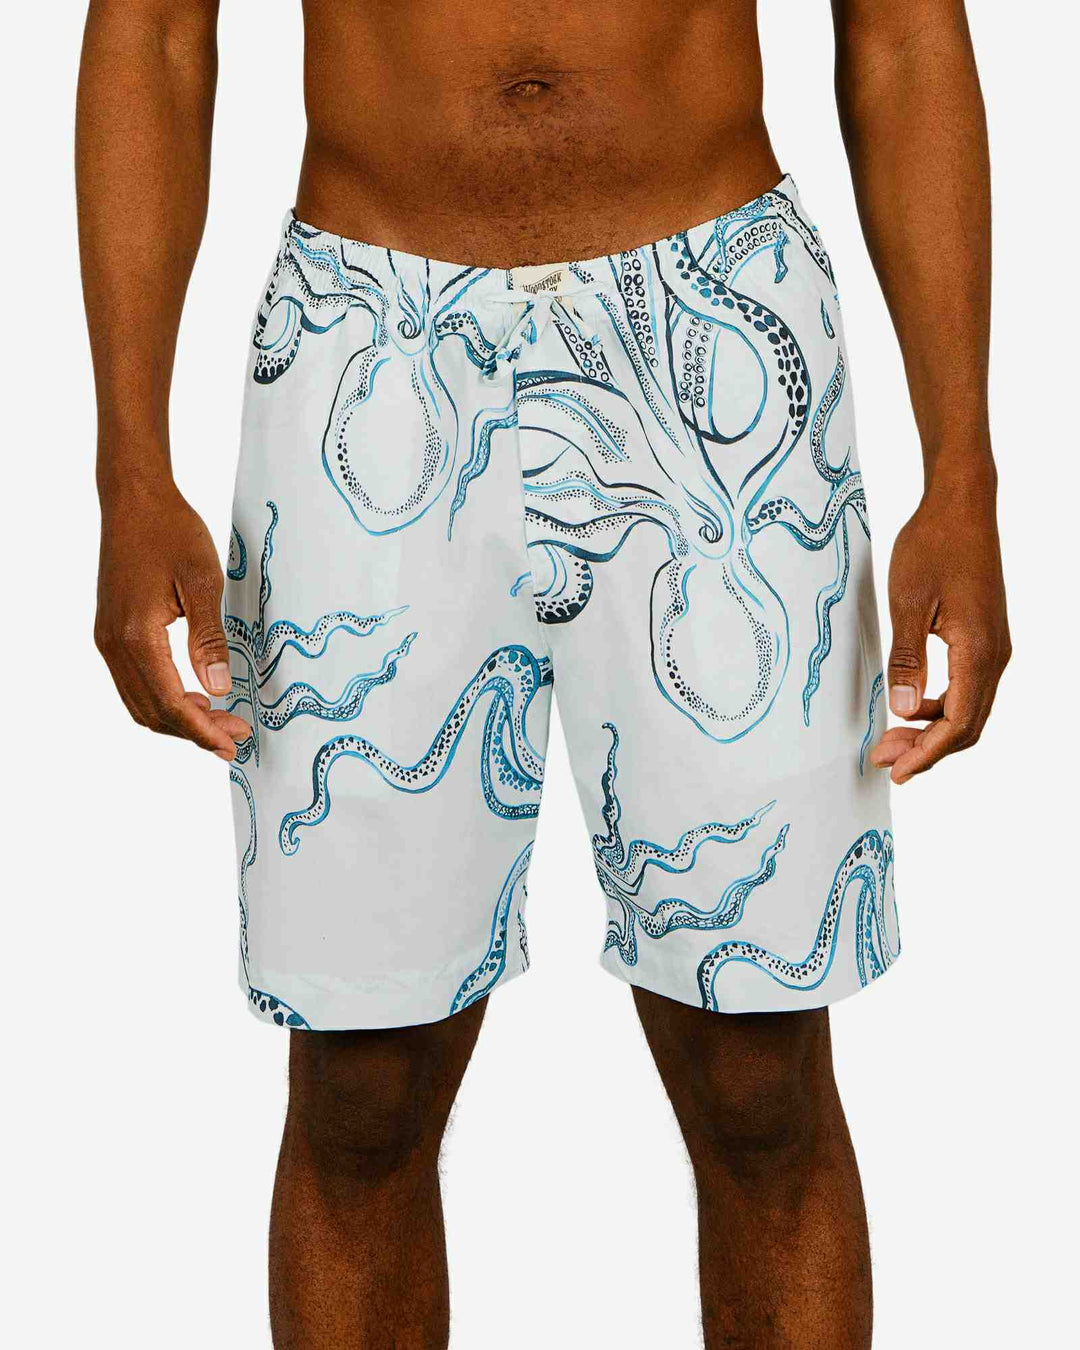 Mens lounge shorts with indogo octopuses on a white background